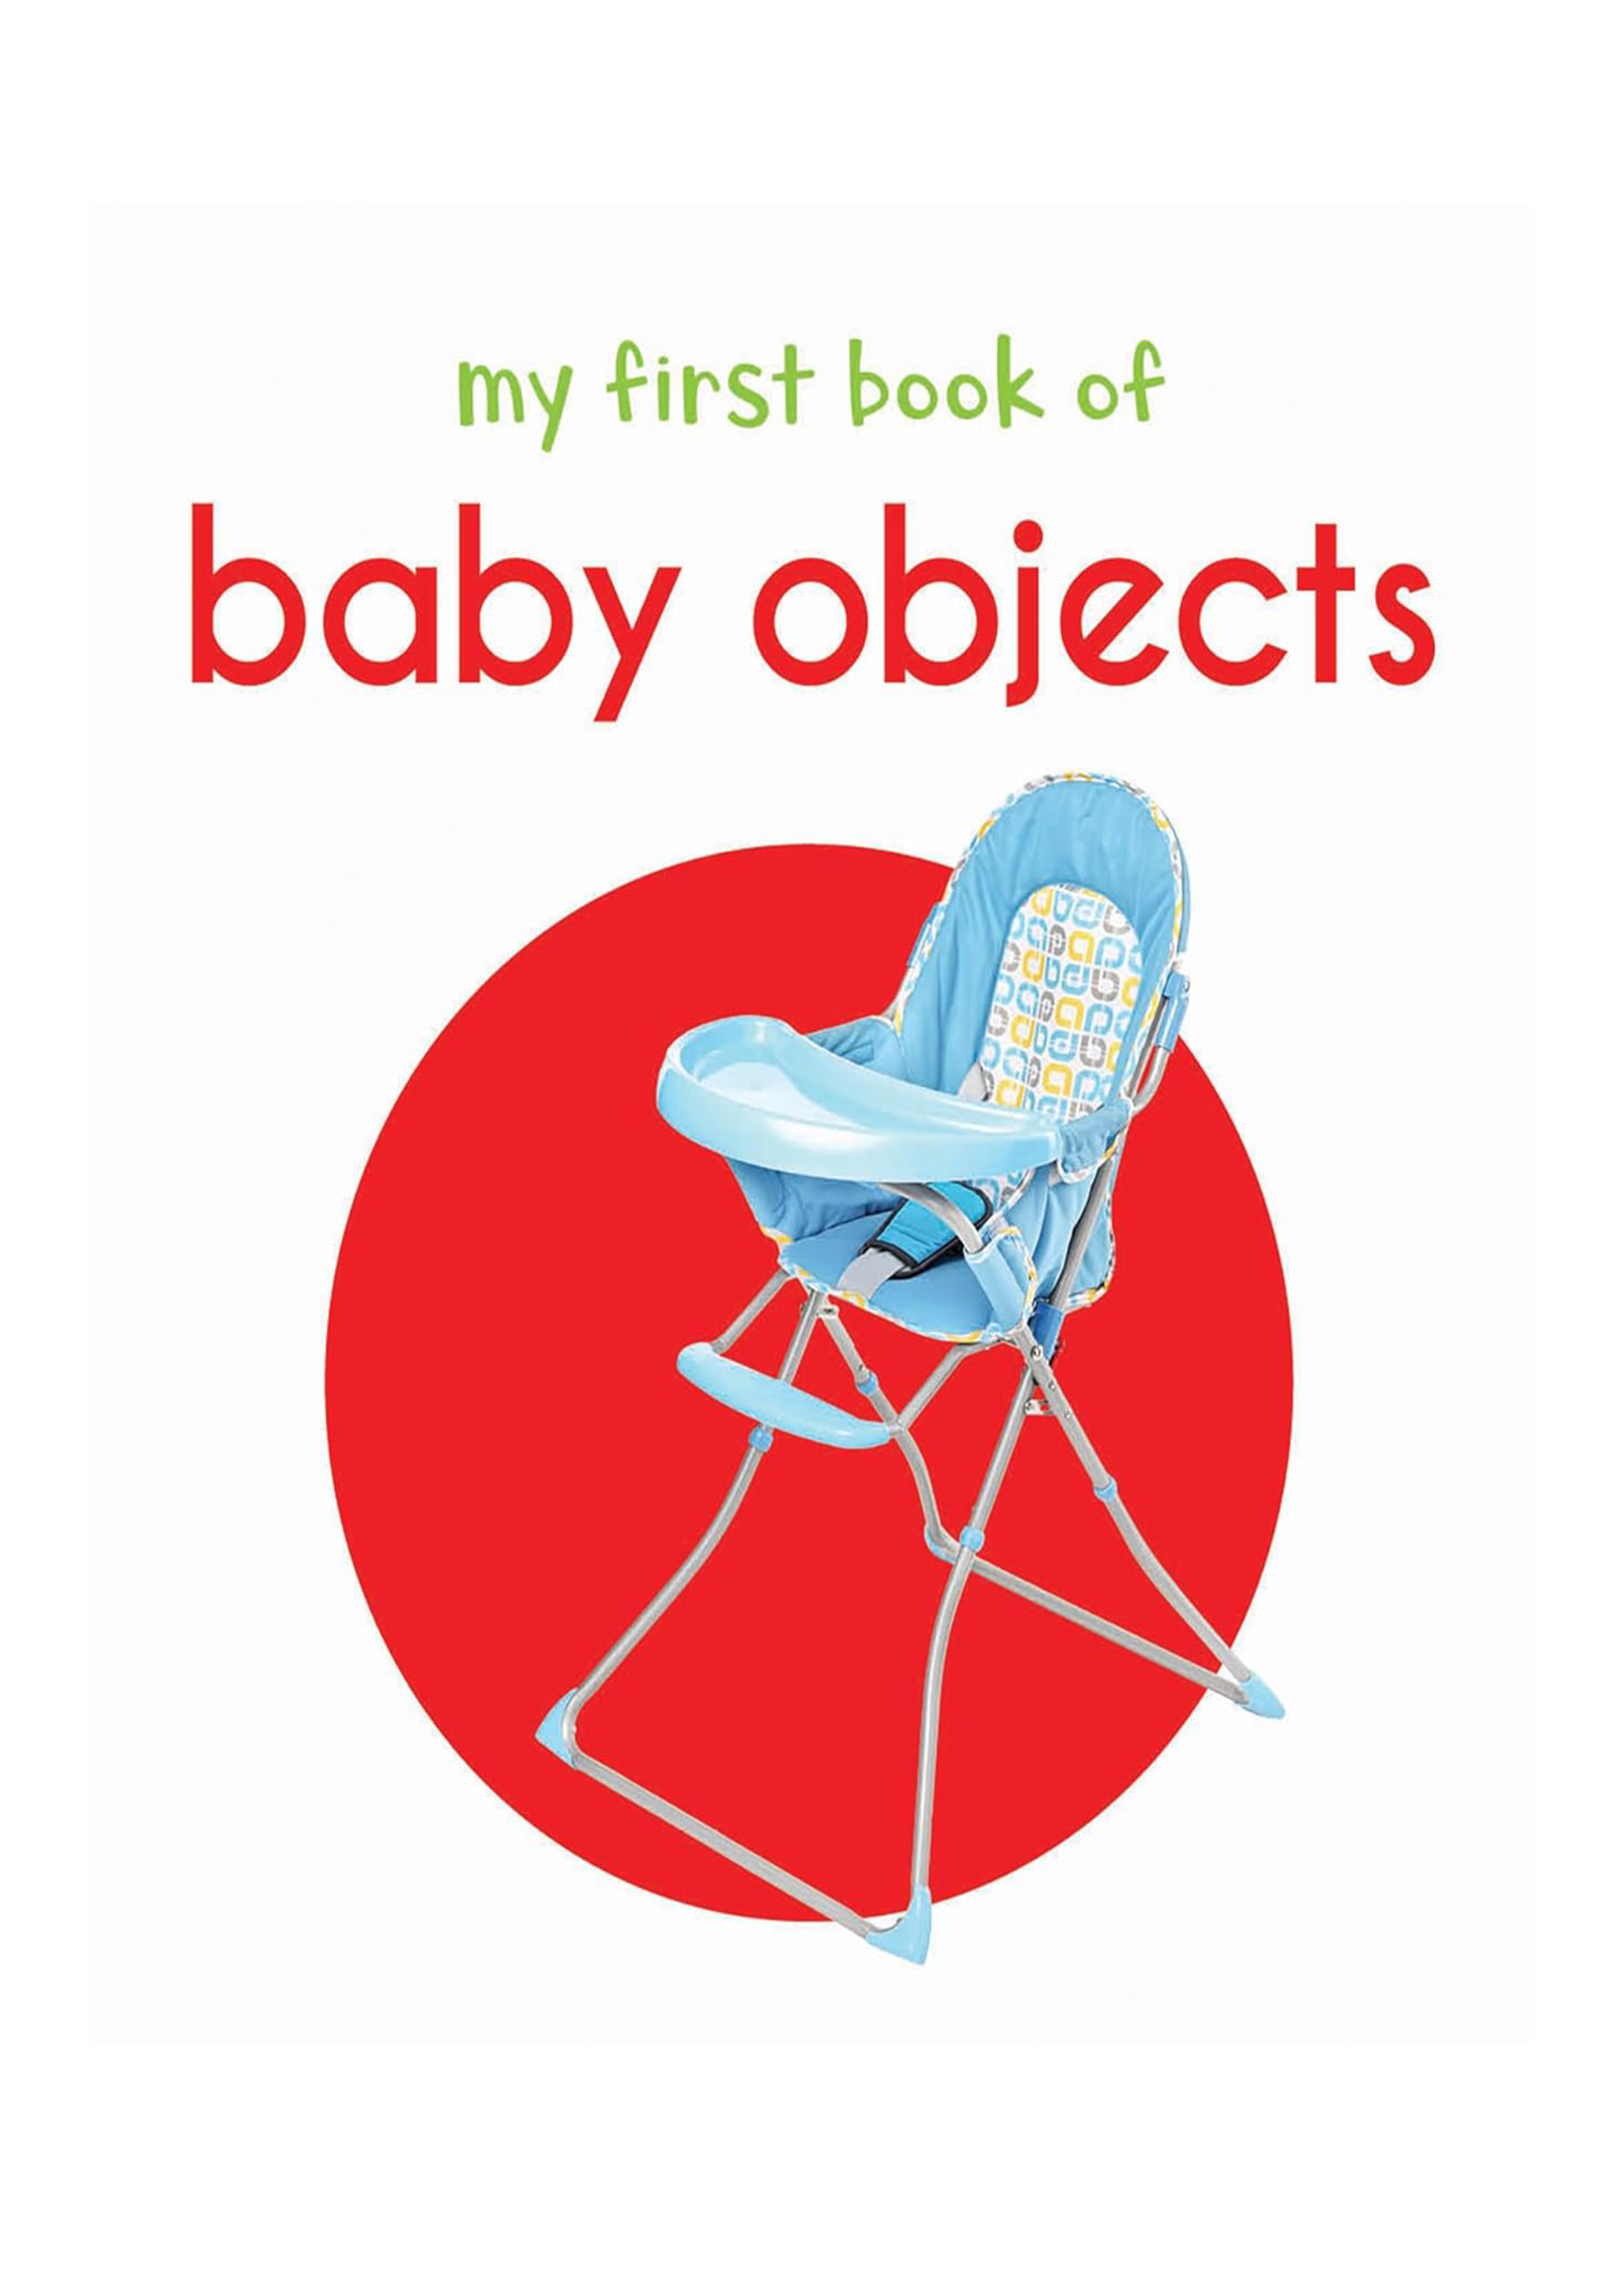 My First Book of baby objects (পেপারব্যাক)